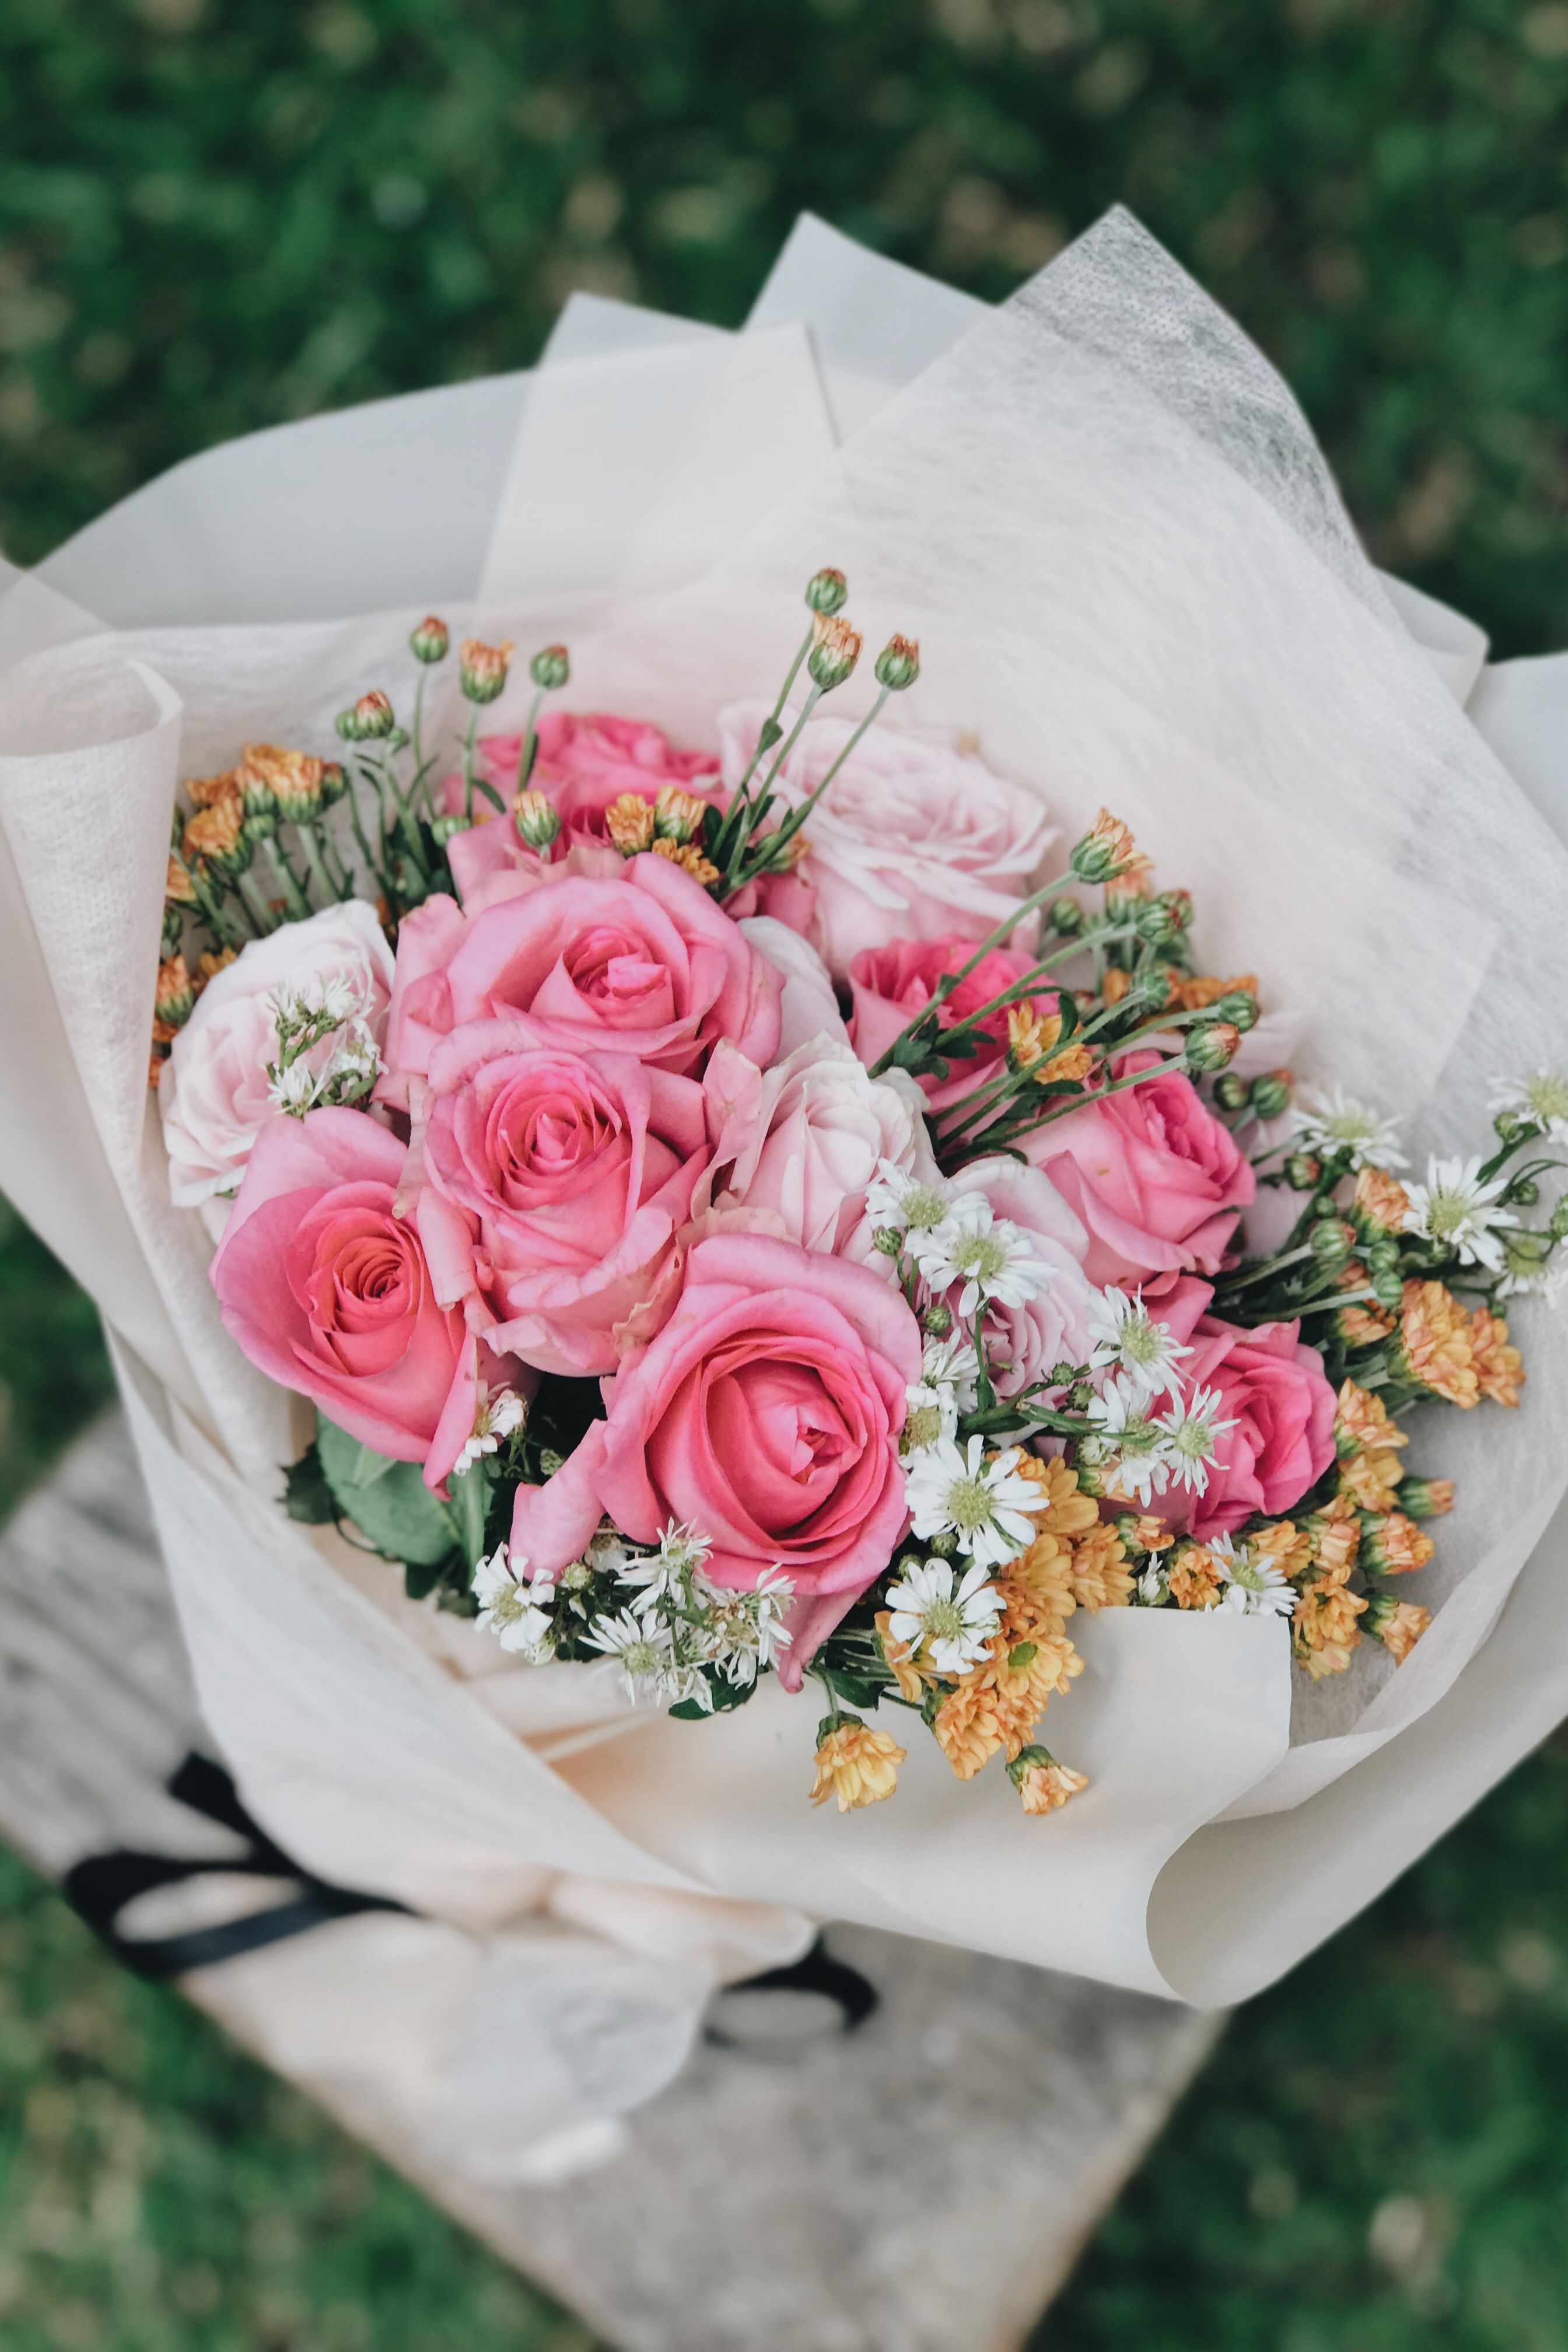 Flower Delivery Services The Best Places To Order Flowers Online